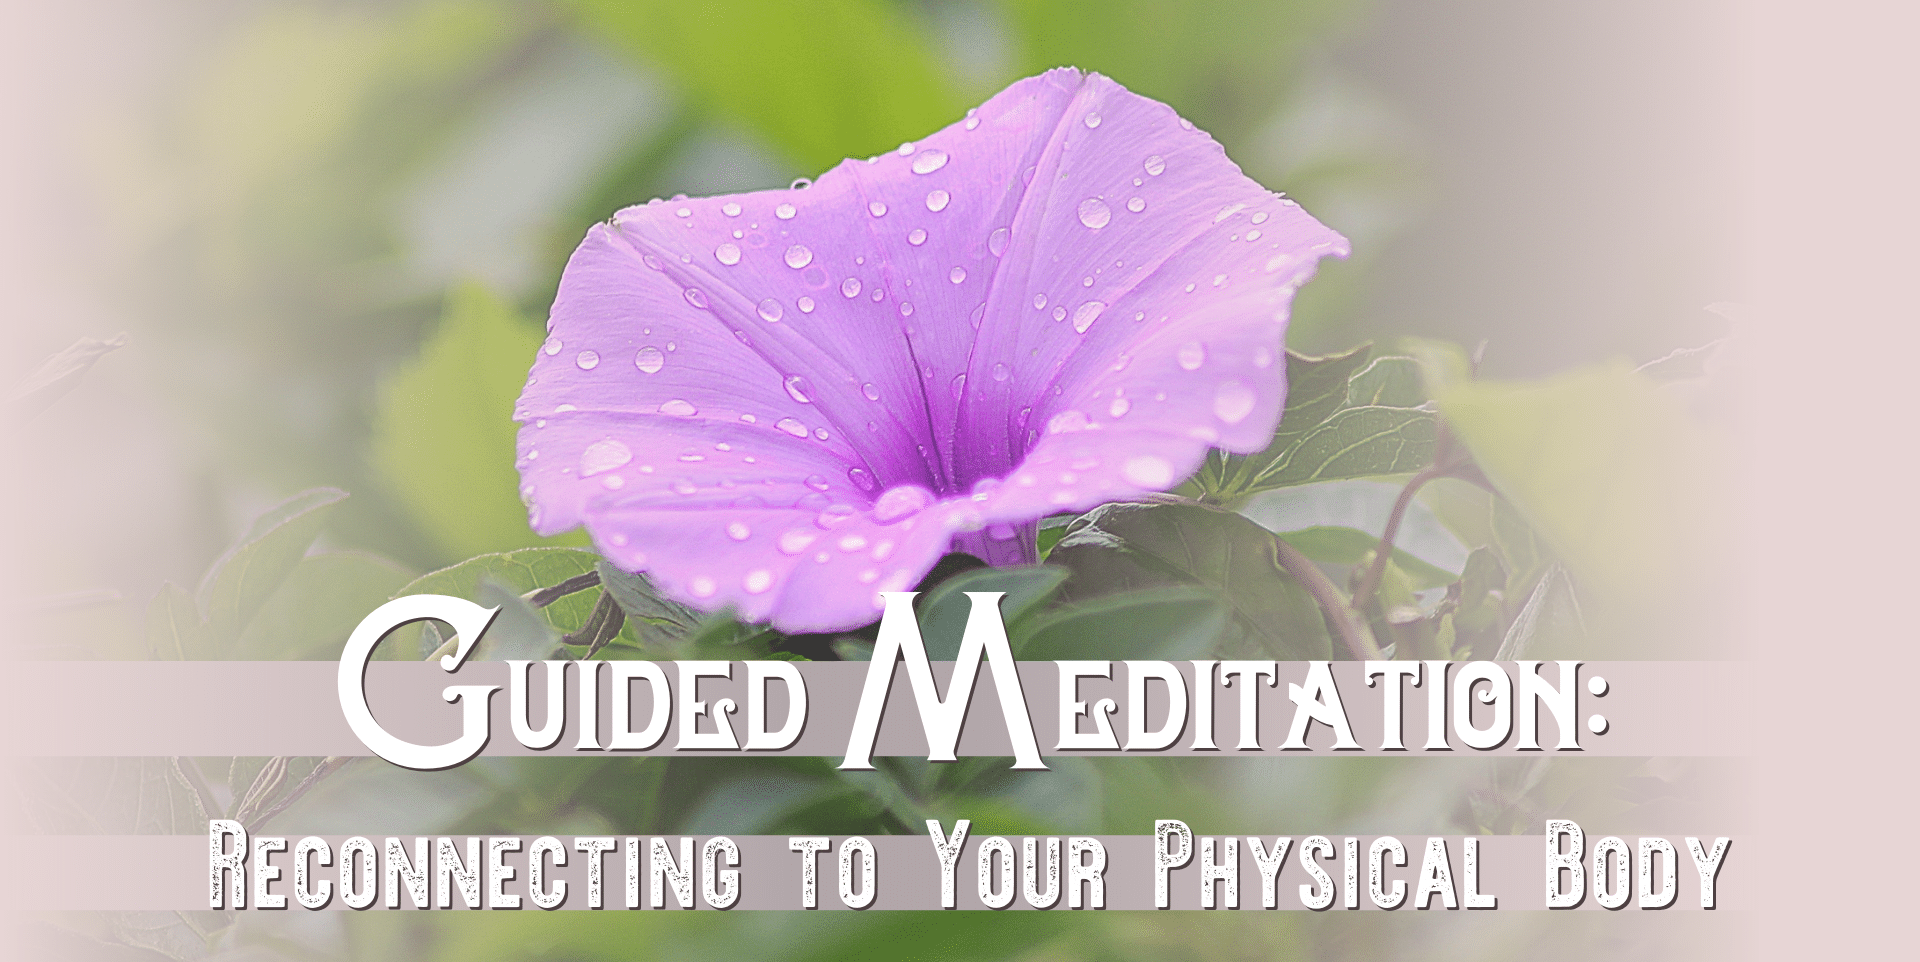 Guided Meditation: Reconnecting to Your Physical Body